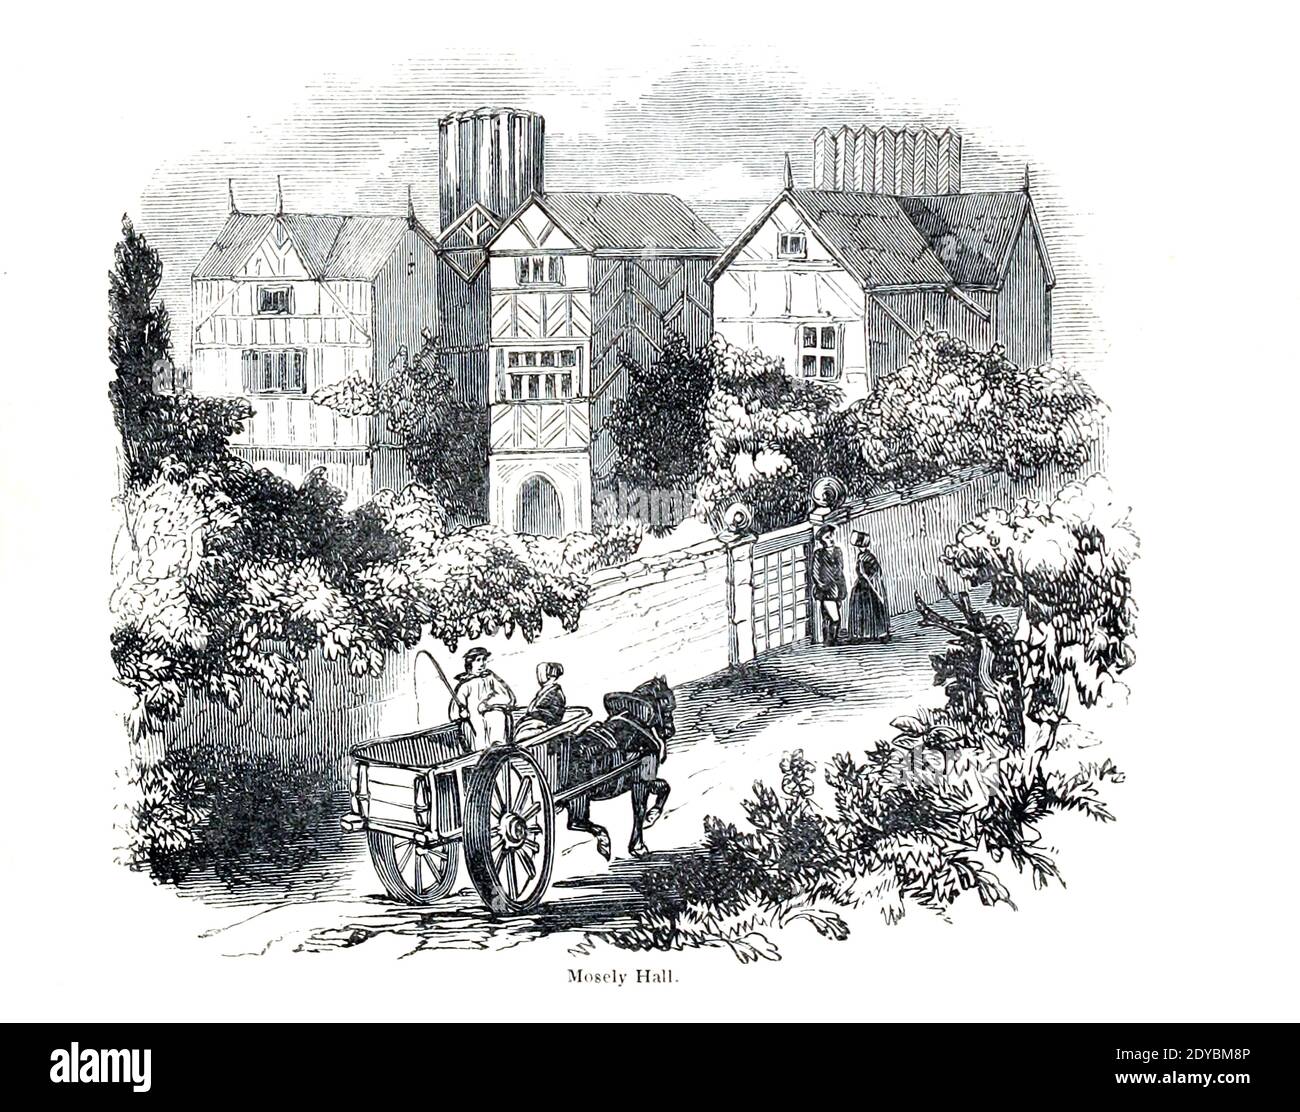 Mosely Hall From the book The wanderings of a pen and pencil by Palmer, F. P. (Francis Paul); Illustrated by Crowquill, Alfred, [Alfred Henry Forrester]  Published in London by Jeremiah How in 1846 Stock Photo